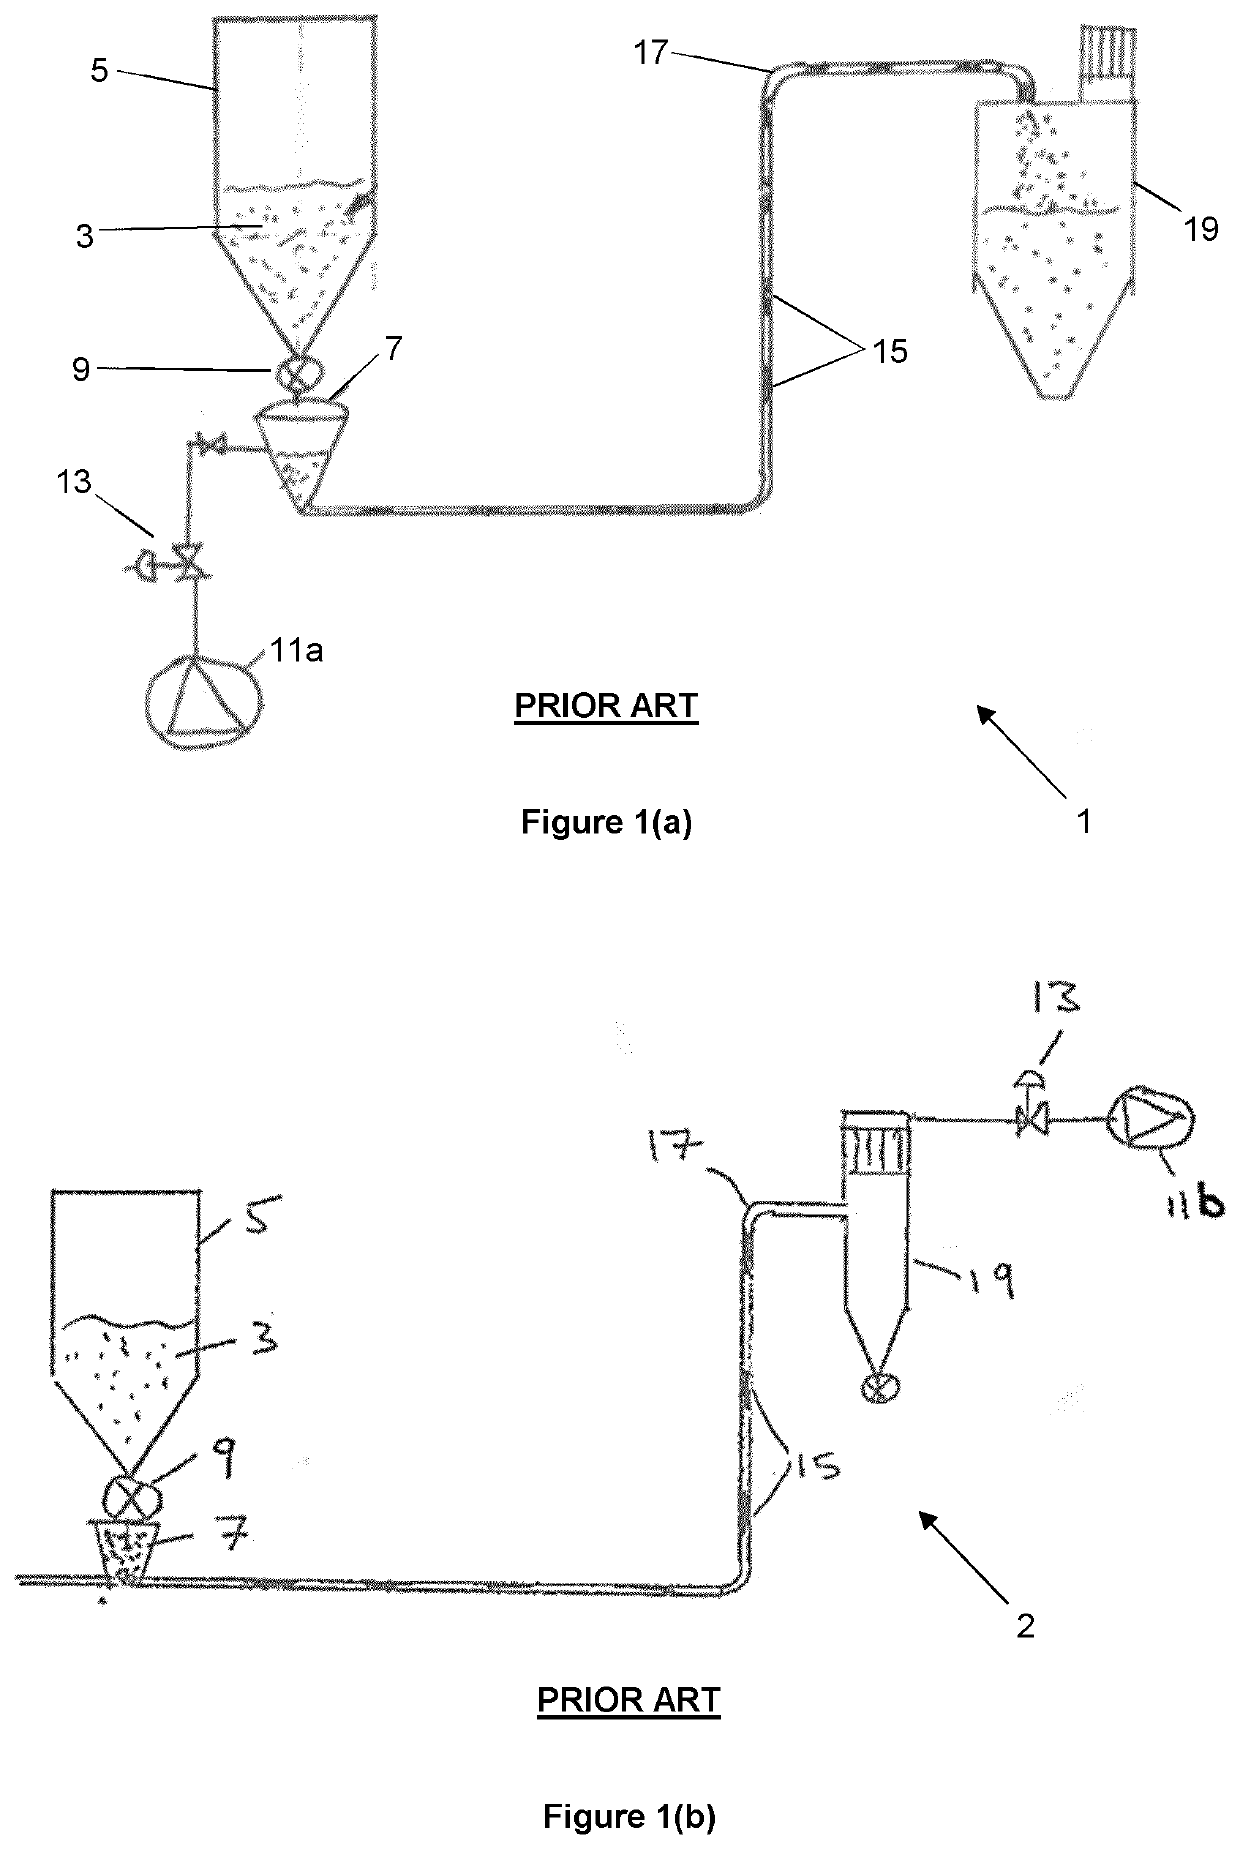 Material conveying apparatus with shut down valves